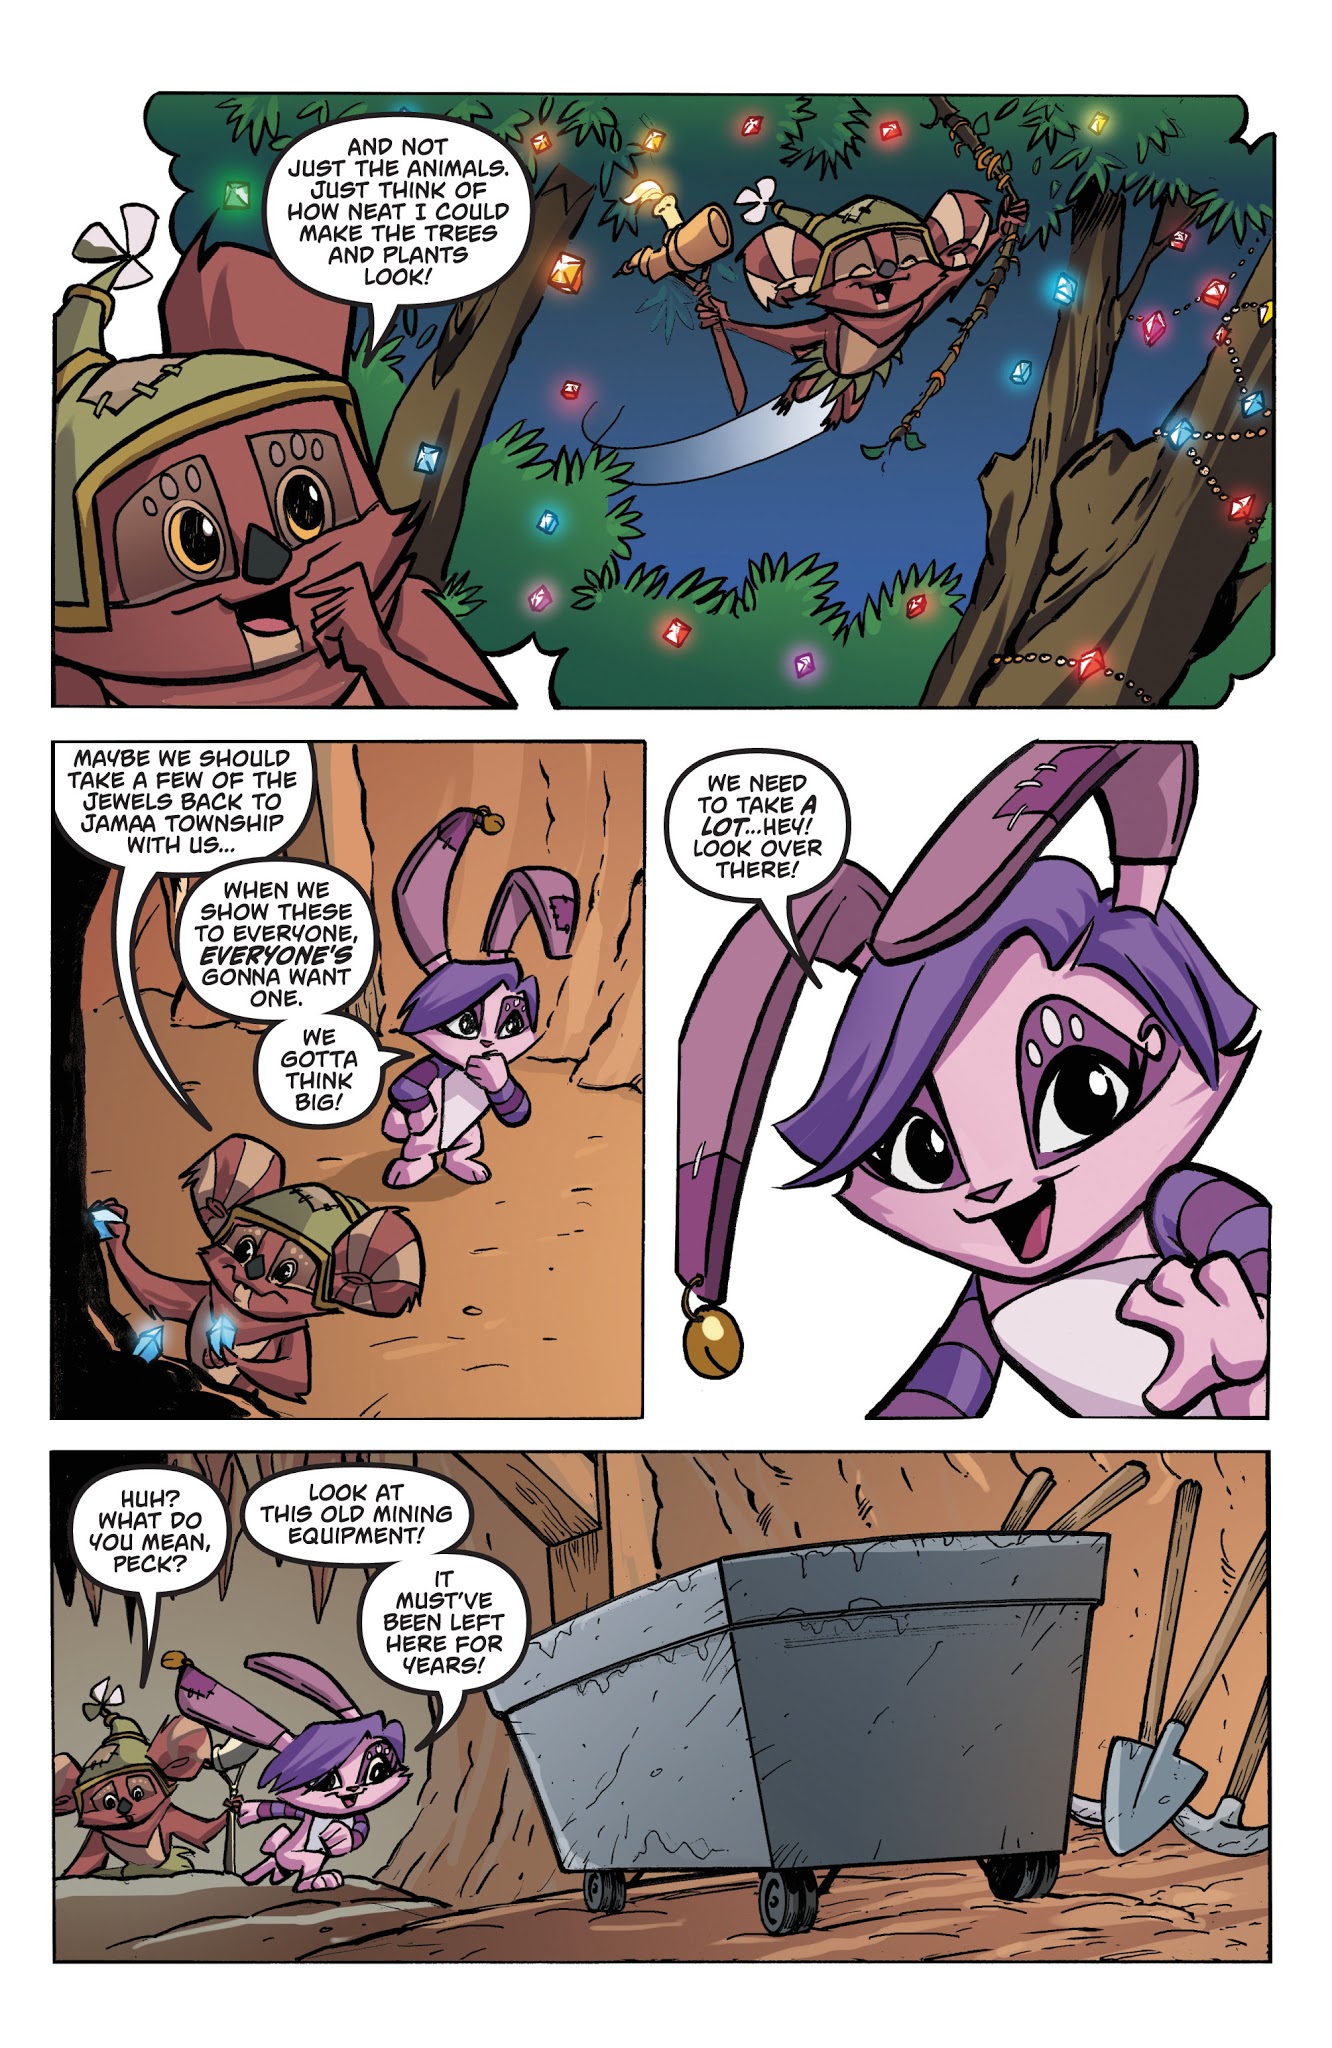 Animal Jam Issue 2 | Read Animal Jam Issue 2 comic online in high quality.  Read Full Comic online for free - Read comics online in high quality  .|